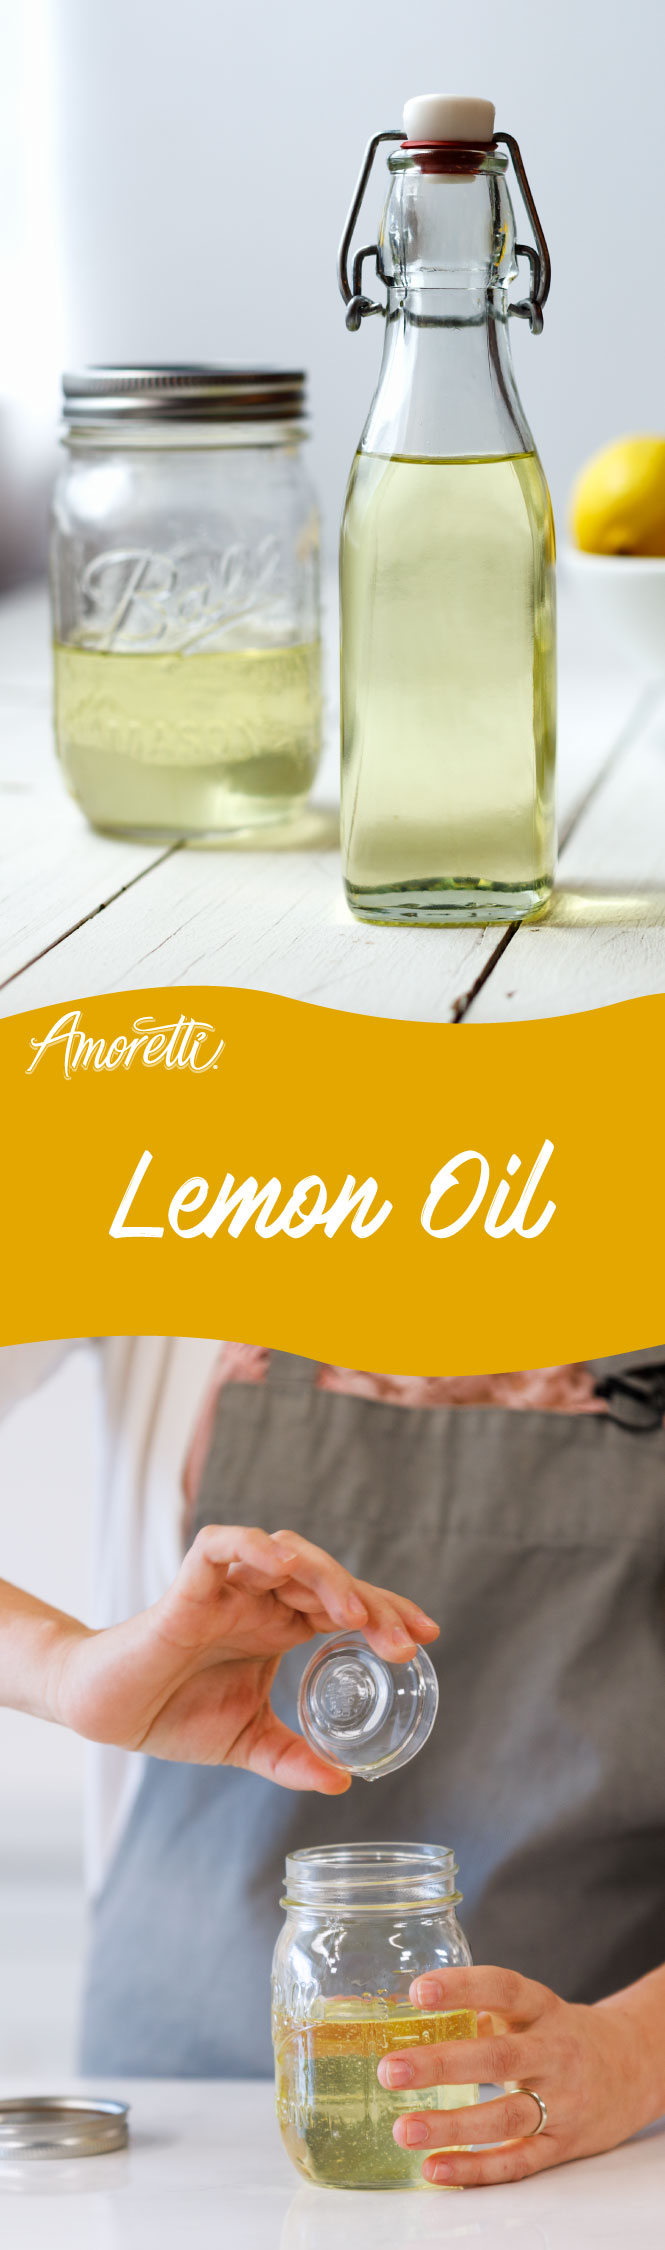 Add a splash of flavor to any meal with your very own house-made Lemon Oil!